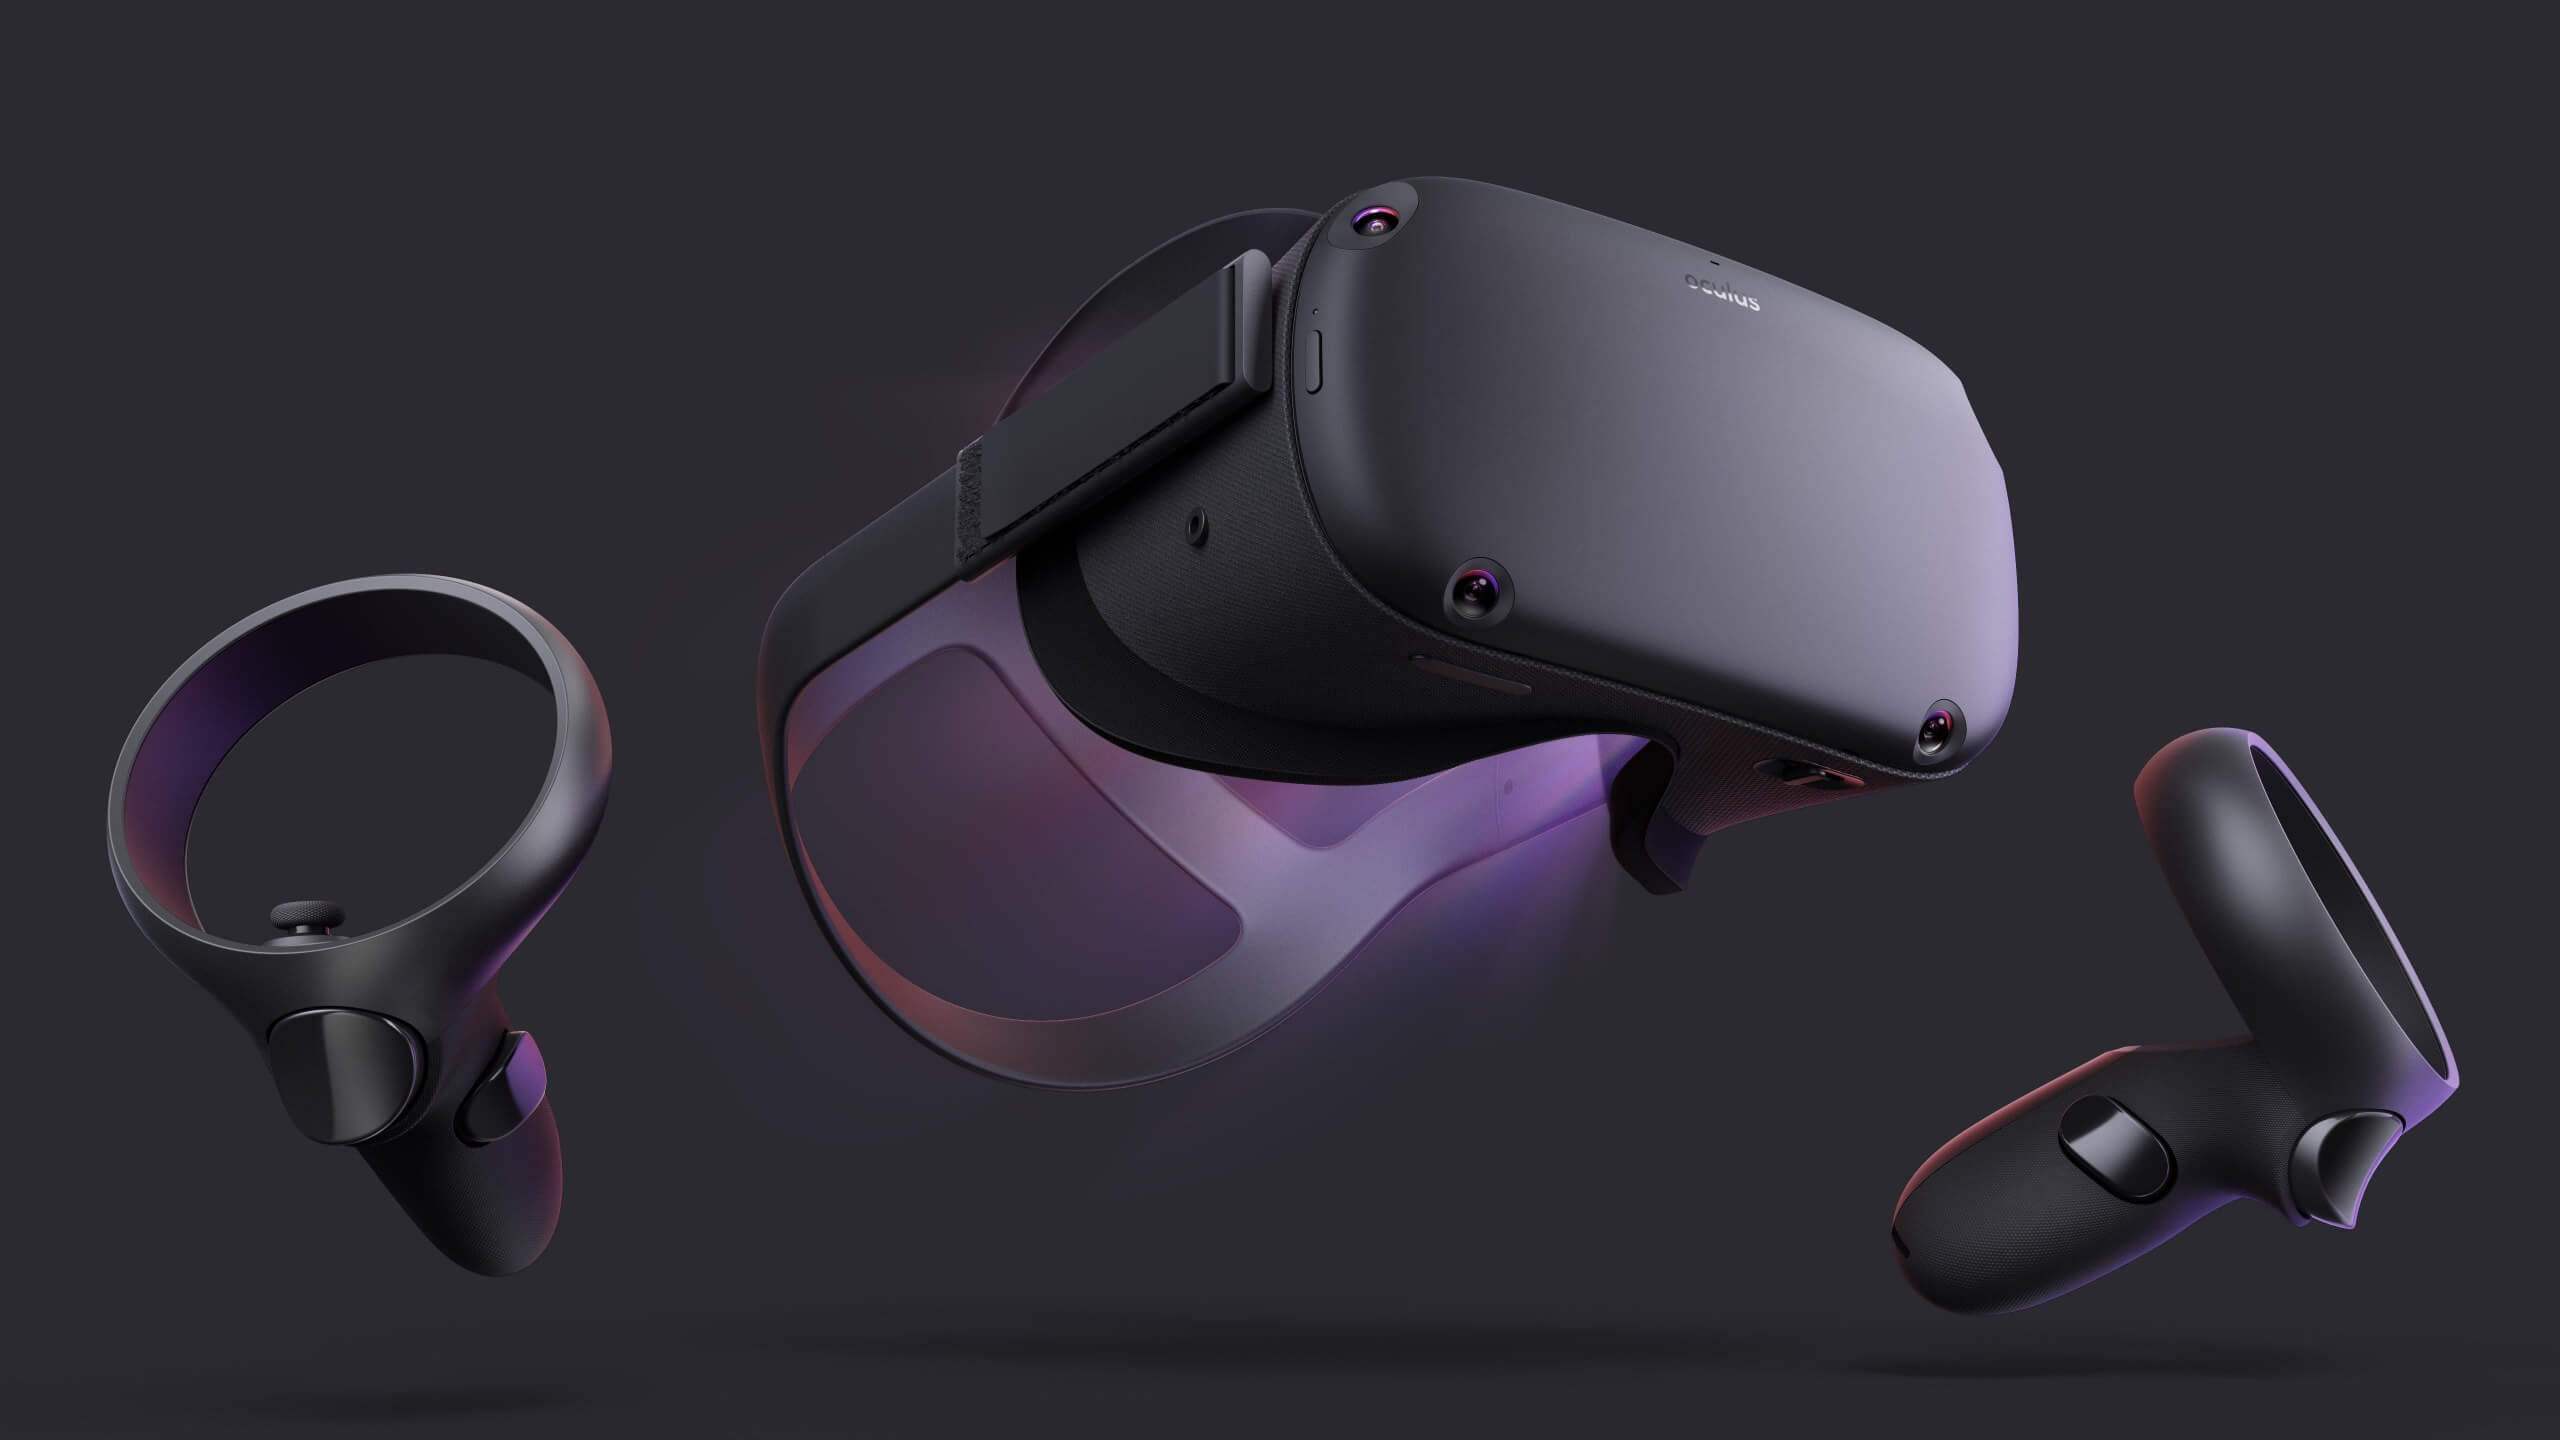 SteamVR streaming is not allowed on Oculus Quest